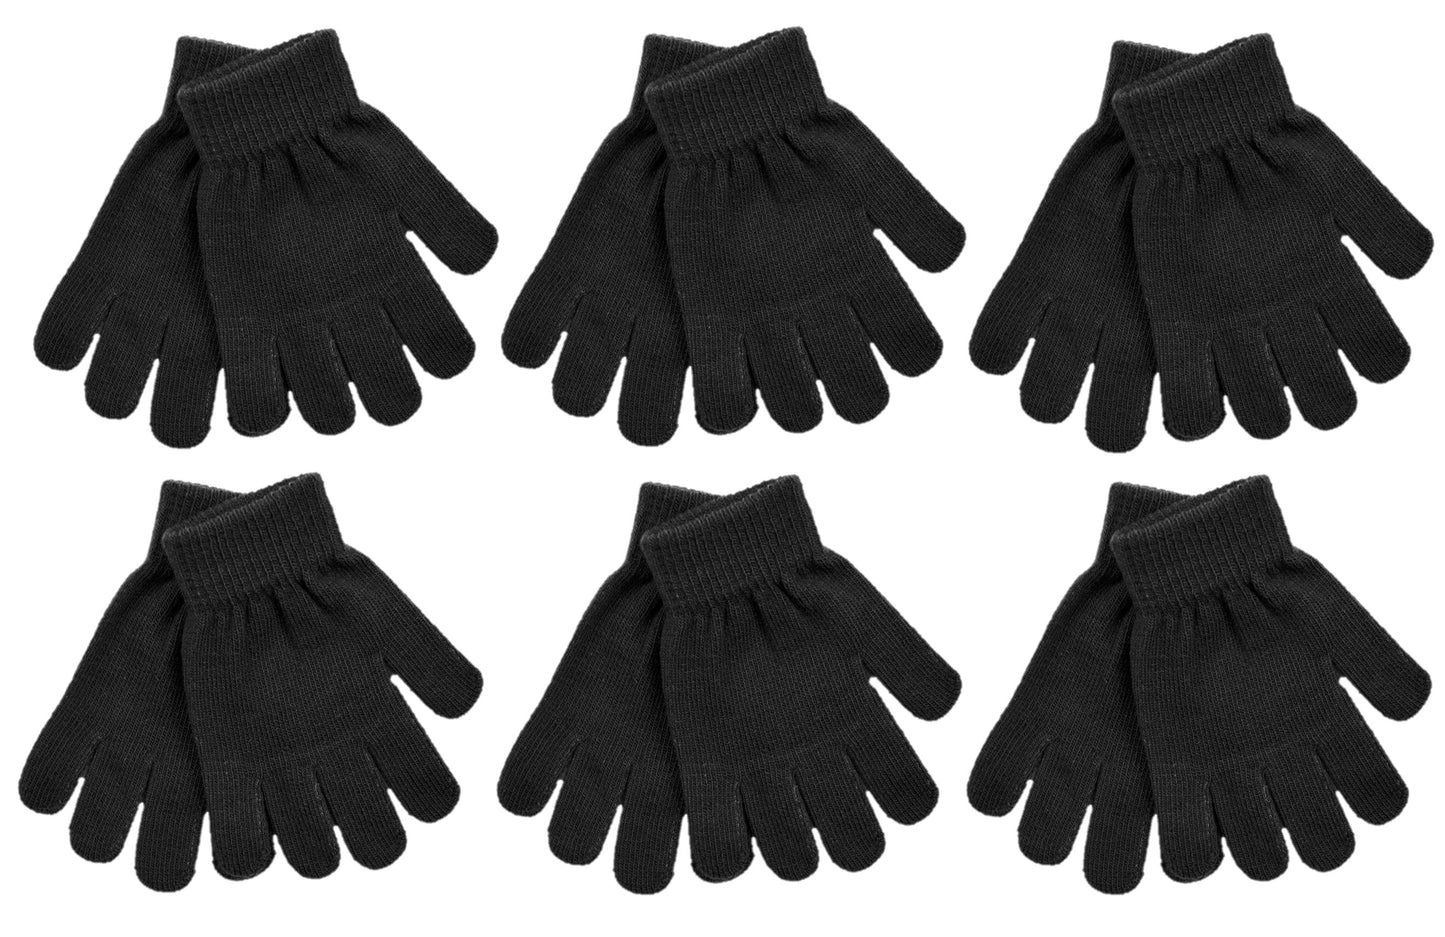 6 Pairs Boys Thermal Knitted Stretch Gloves - Multi or Black